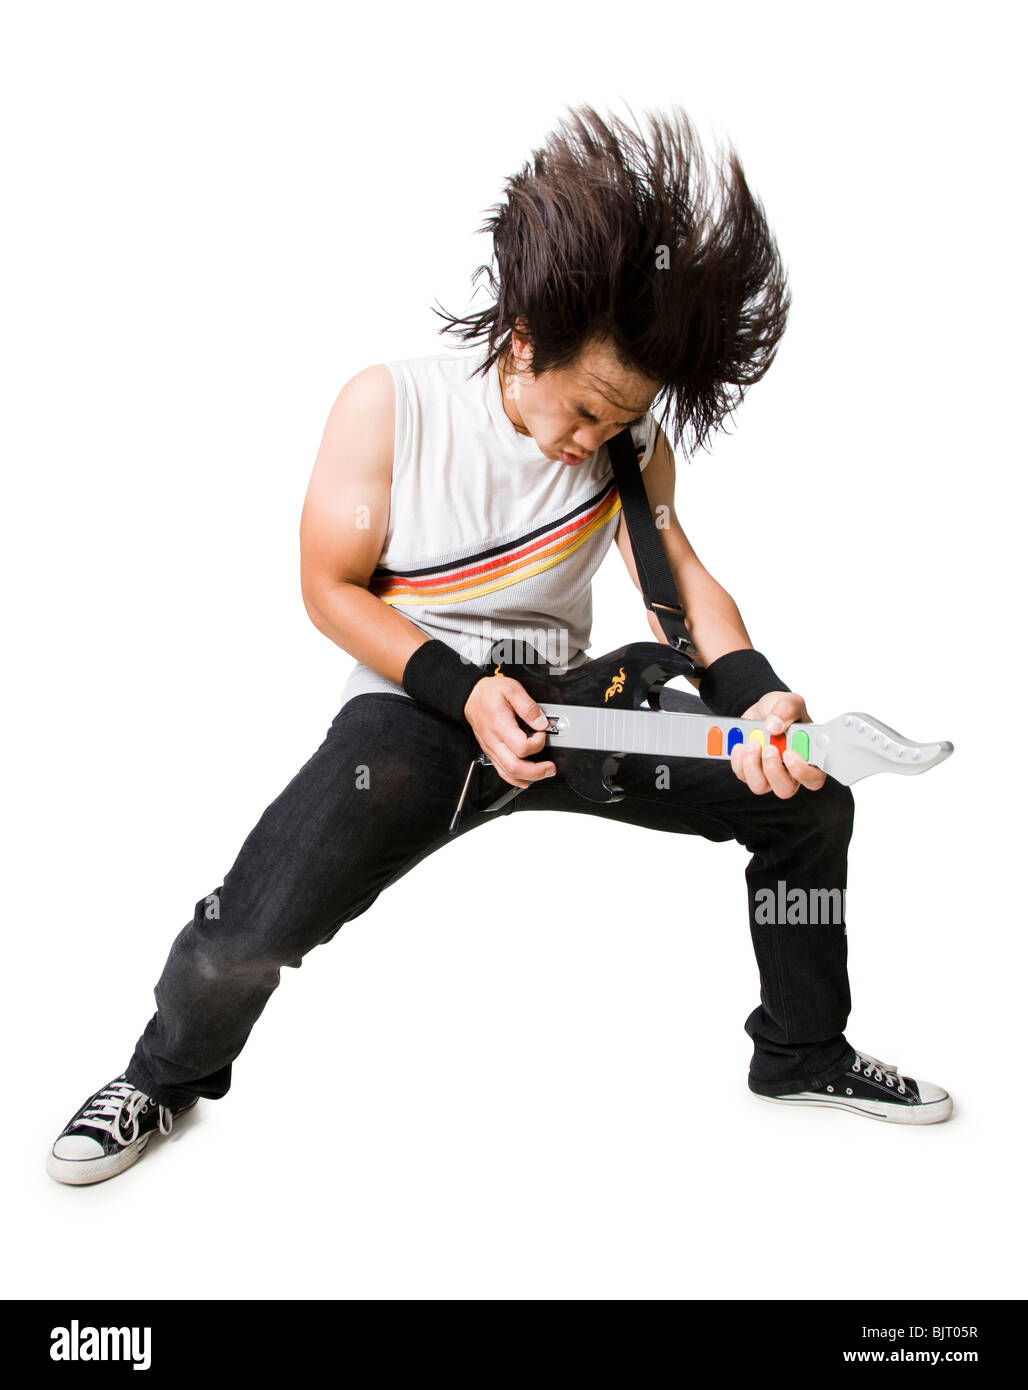 Young man playing guitar video game, portrait Stock Photo